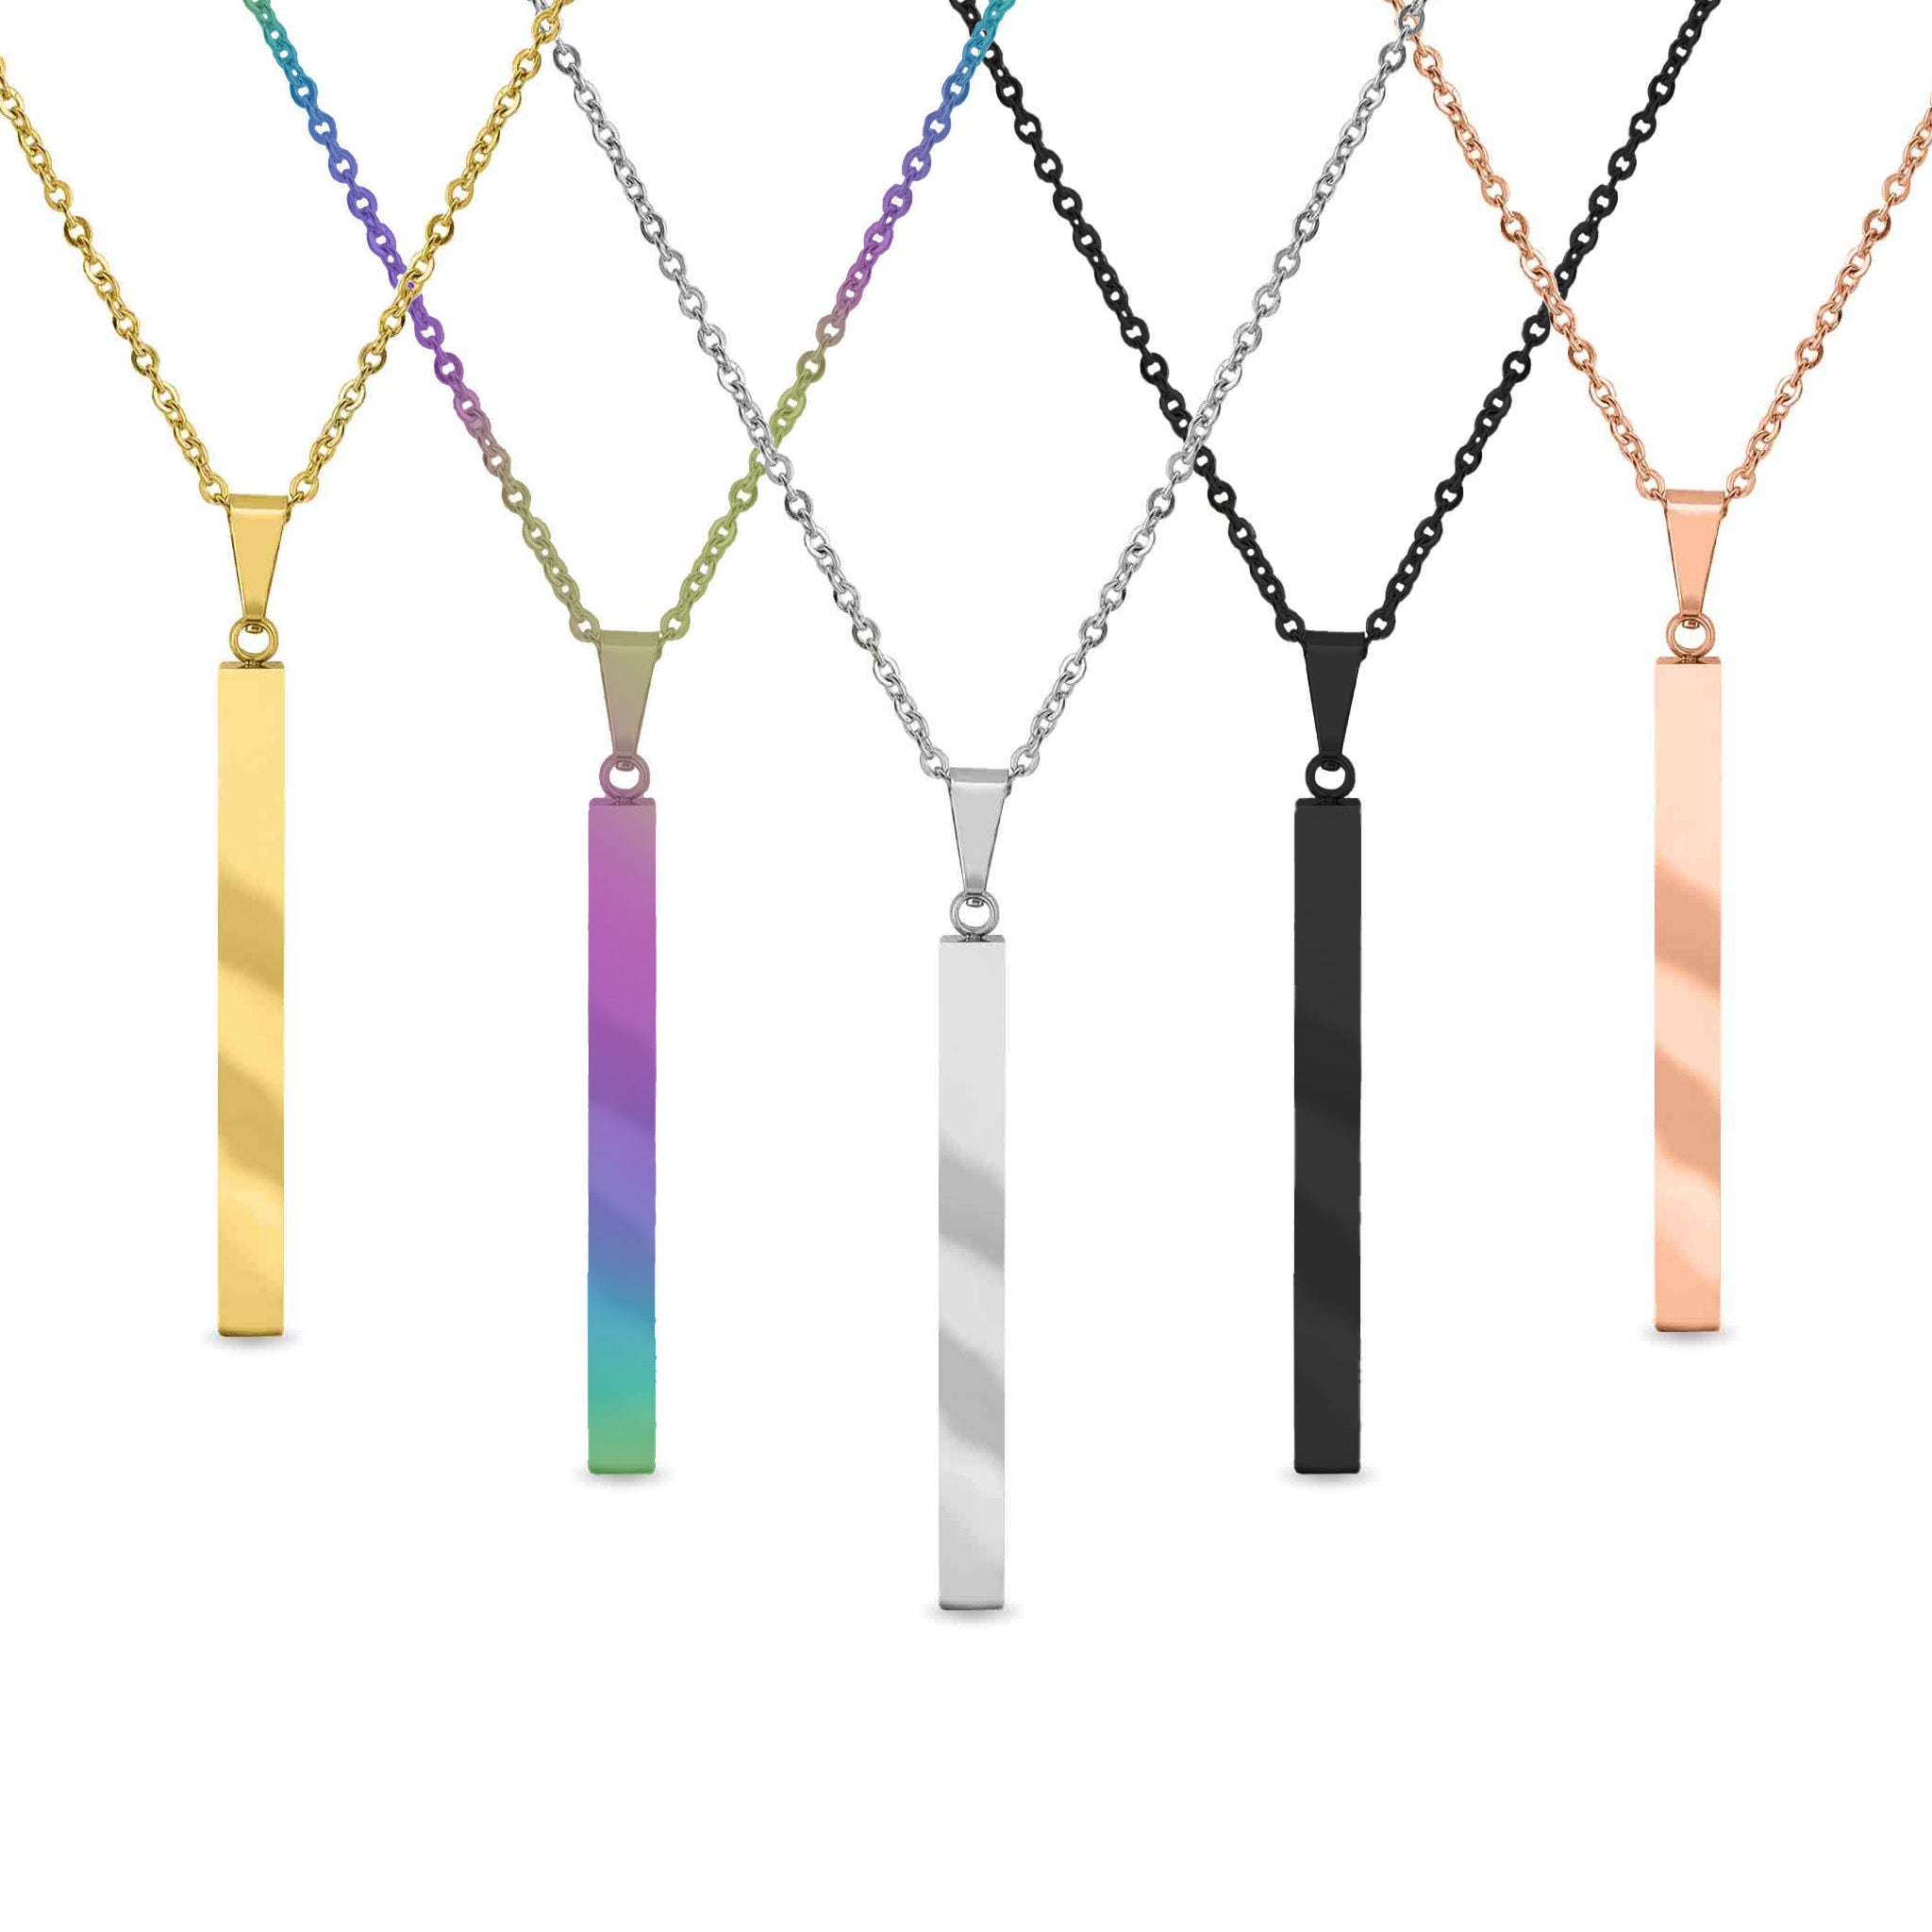 Square 4 Sided Vertical Bar Polished Stainless Steel Necklace NEW Top Bail / SBB0134